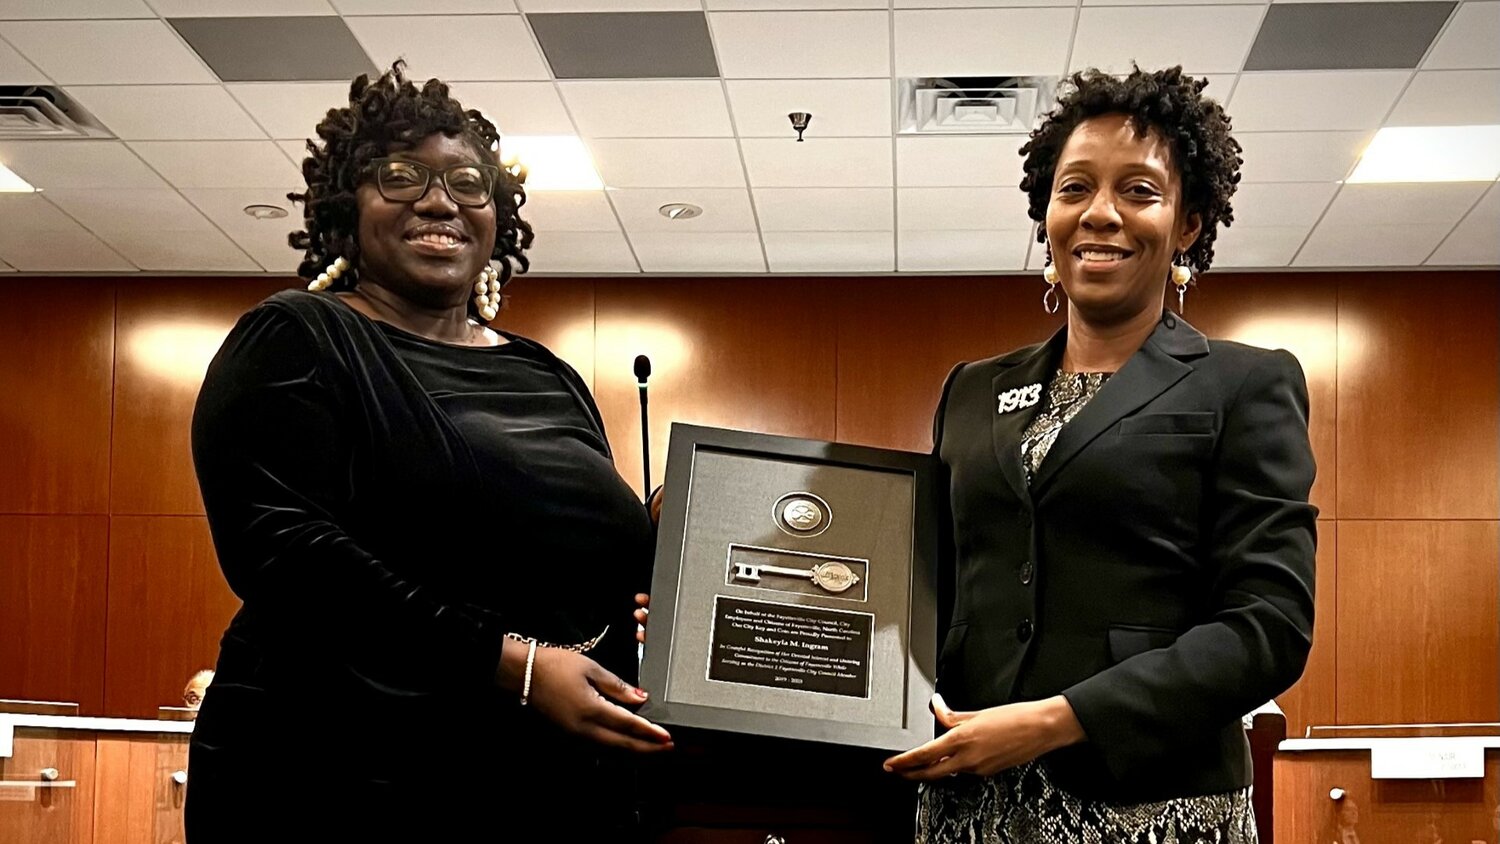 Councilmember Shakeyla Ingram accepts a symbolic "key to the city" from Councilmember Courtney Banks-McLaughlin, who gave a farewell speech recognizing Ingram's work on the council.